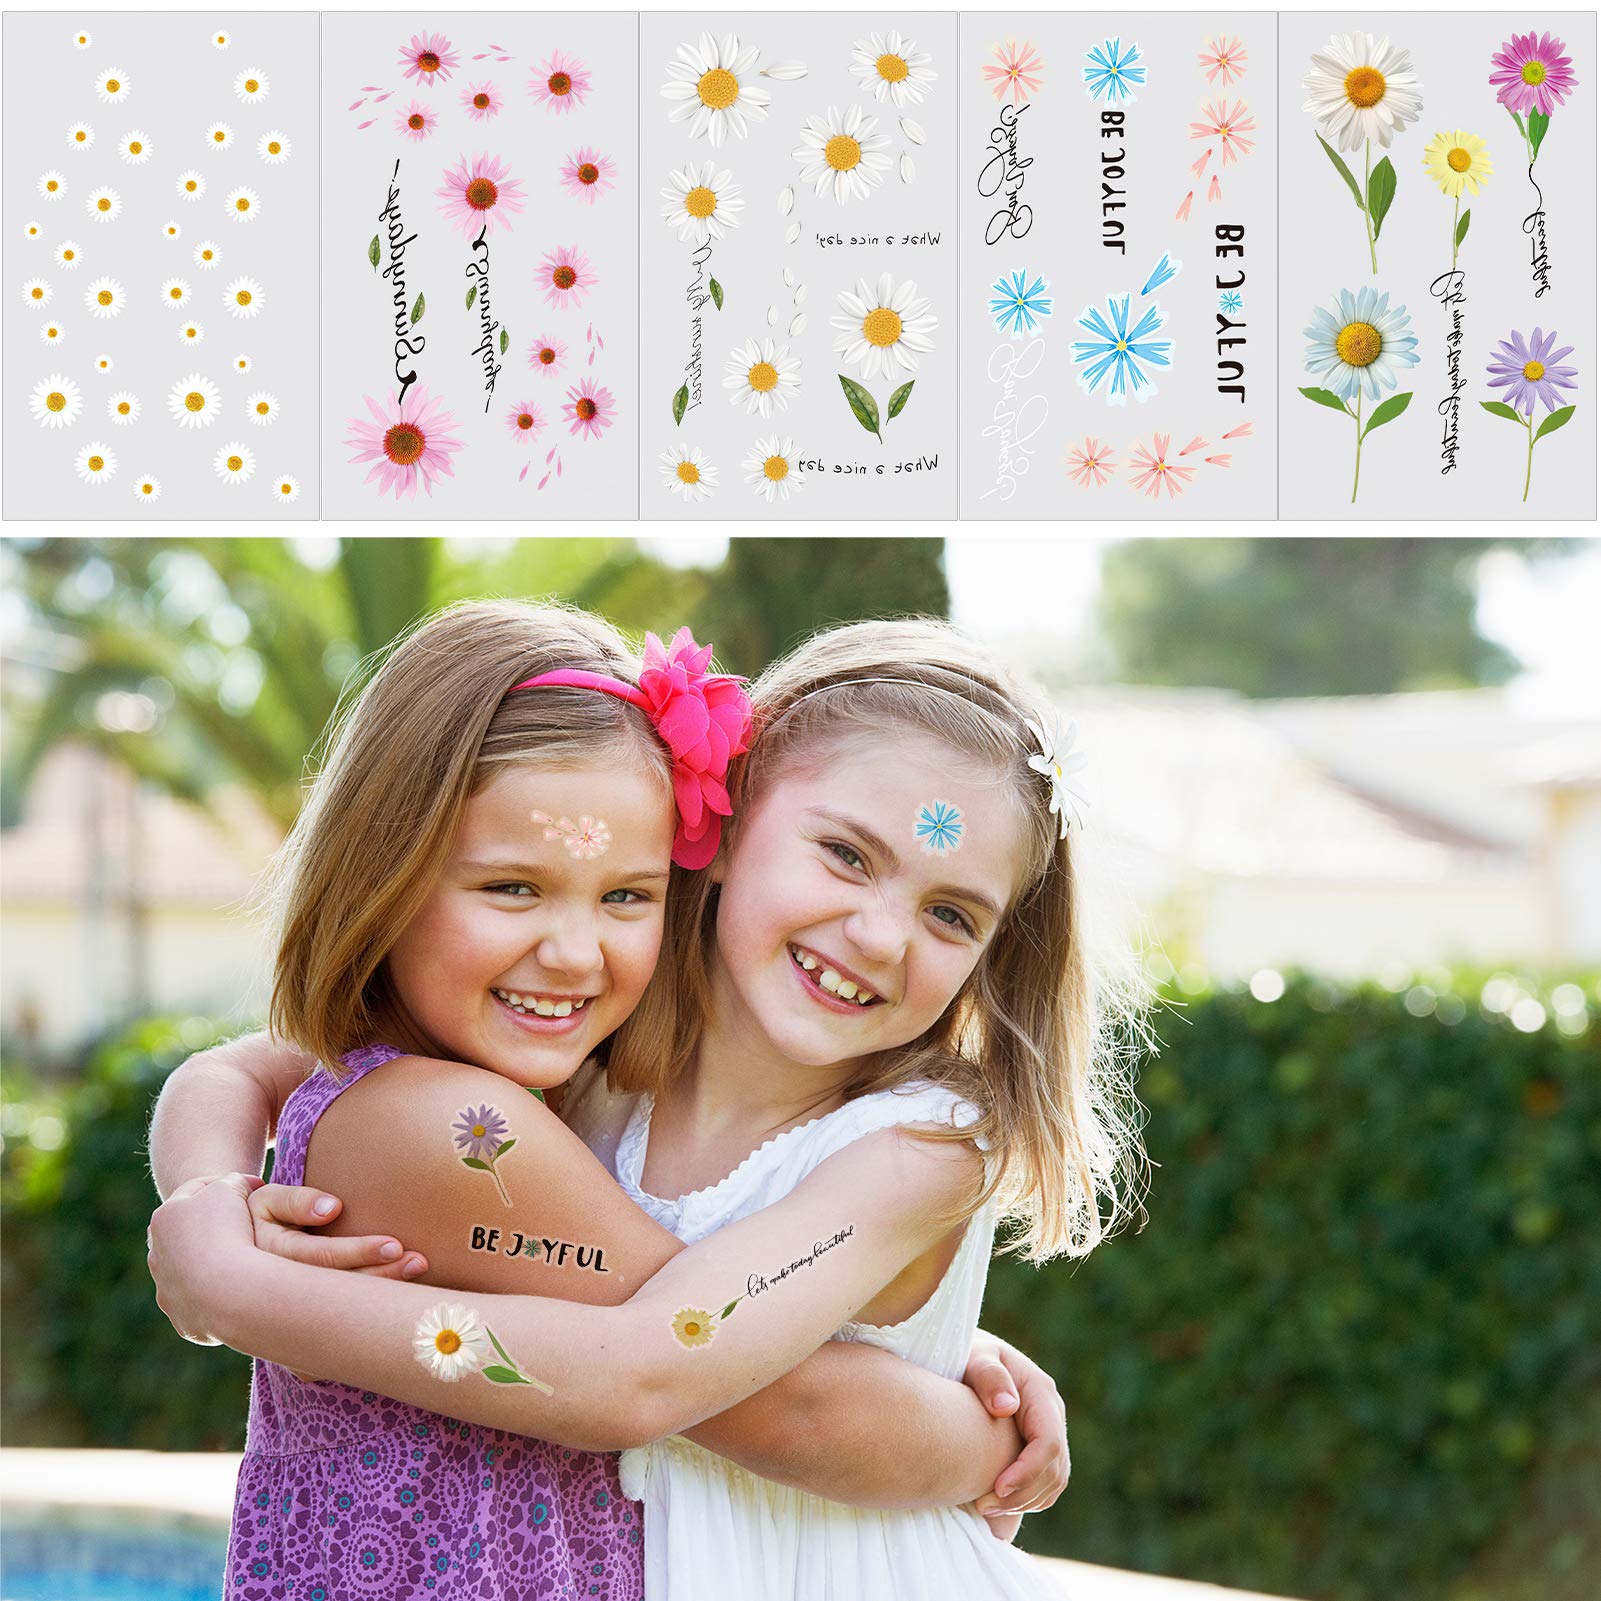 Konsait 25 Sheets Flower Temporary Tattoos, Fake Tiny Temporary Tattoo Waterproof Body Art Sticker for Women Girls Kids,Hand Neck Wrist, Brirthday Party Favour Supplies,Party Bags Filler